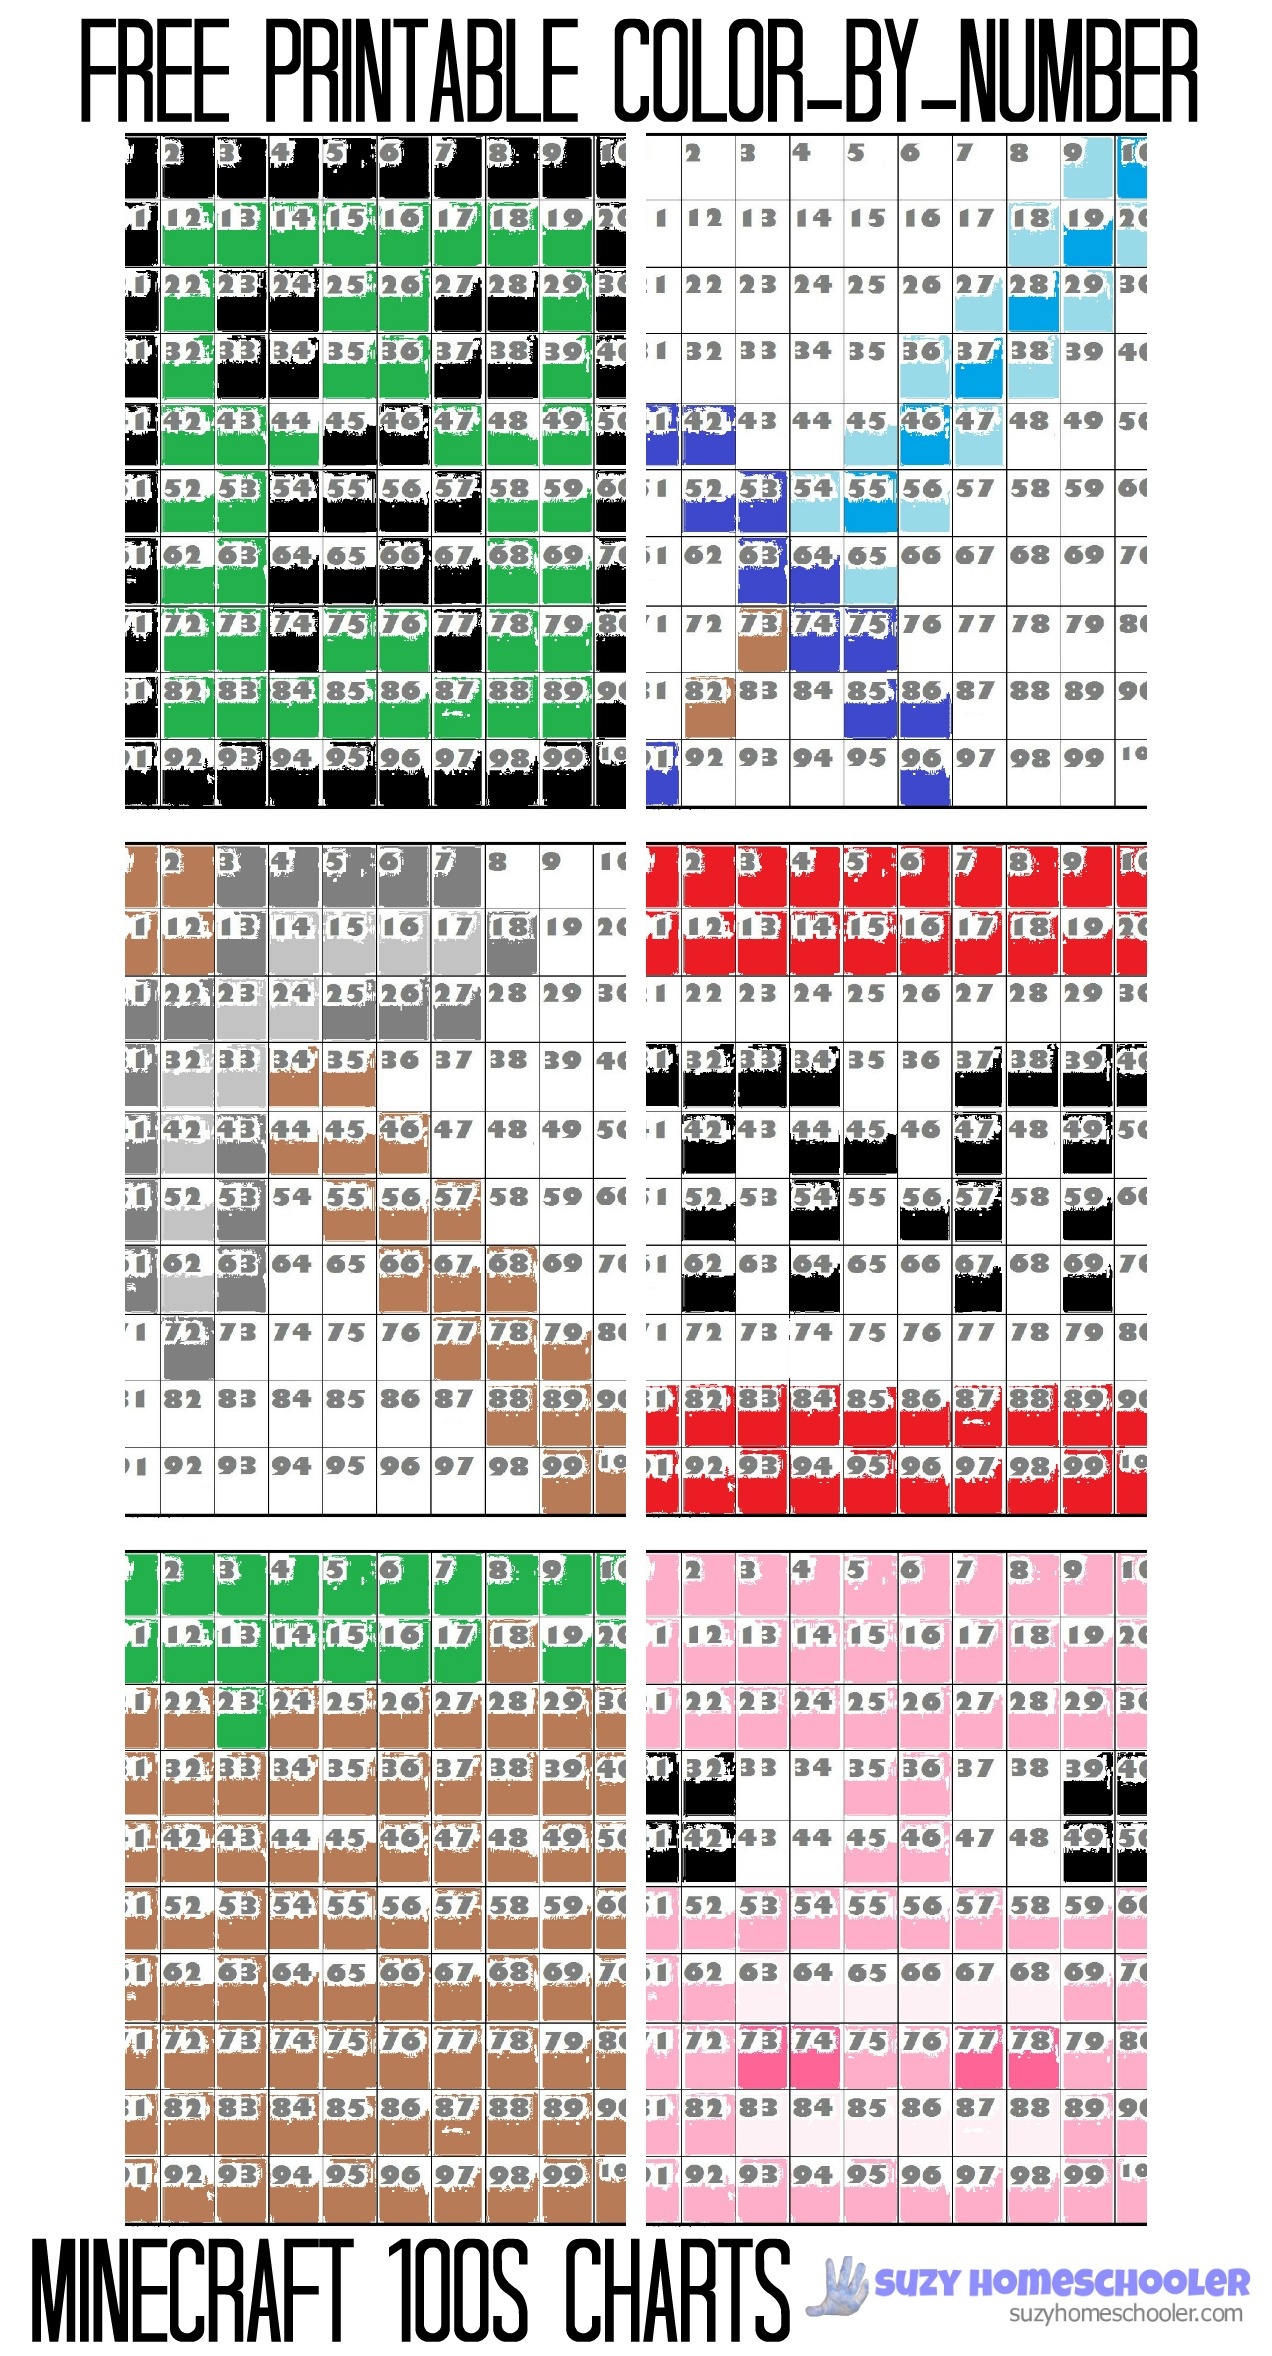 Free Printable Minecraft Color-By-Number 100S Chart Pictures | Suzy - Free Printable Minecraft Activity Pages